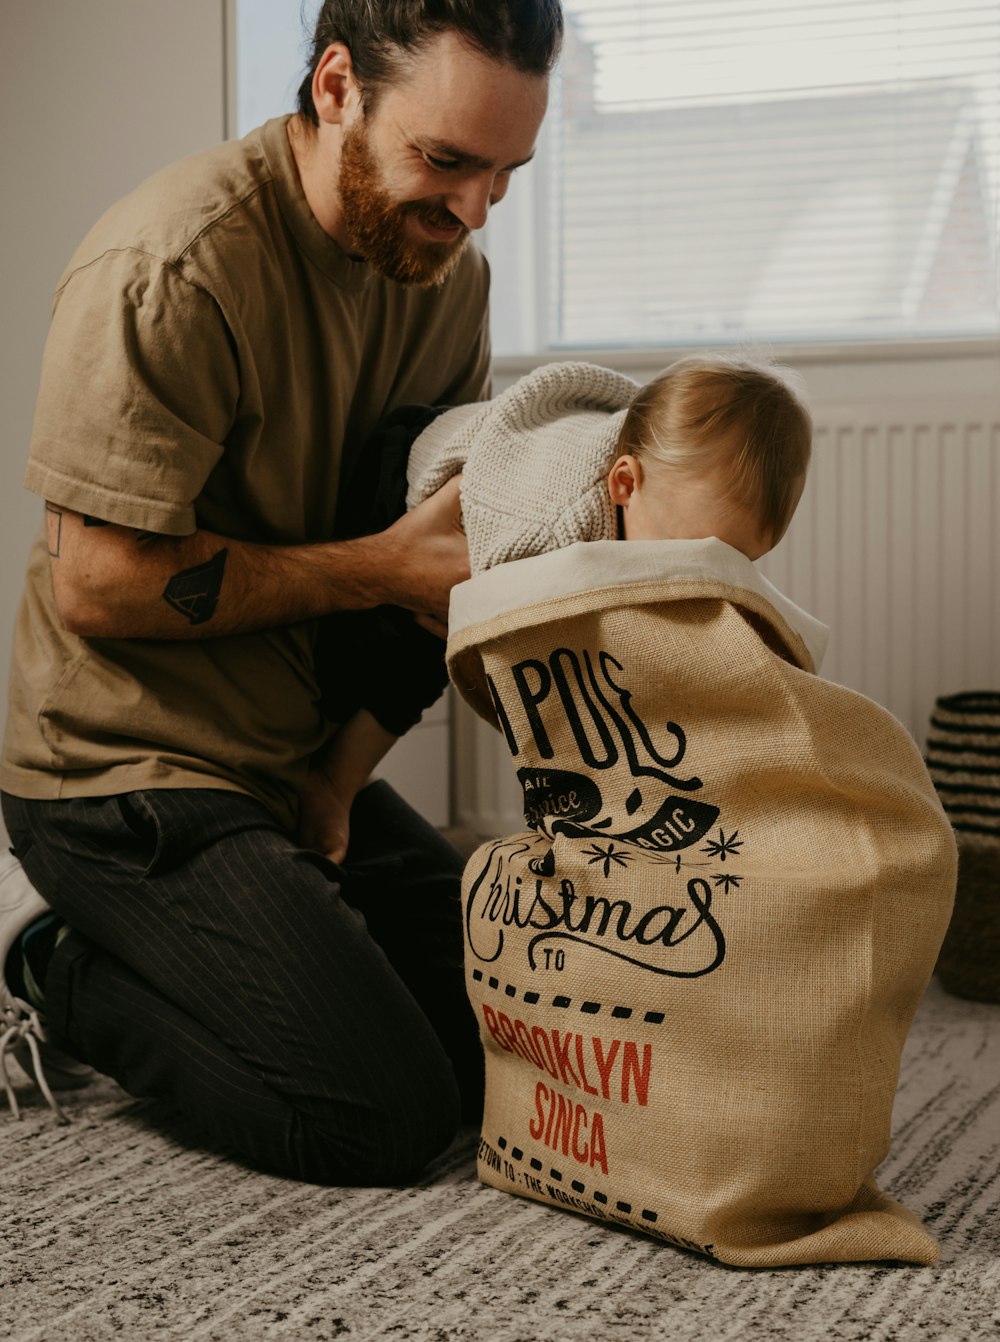 a man holding a baby in a bag